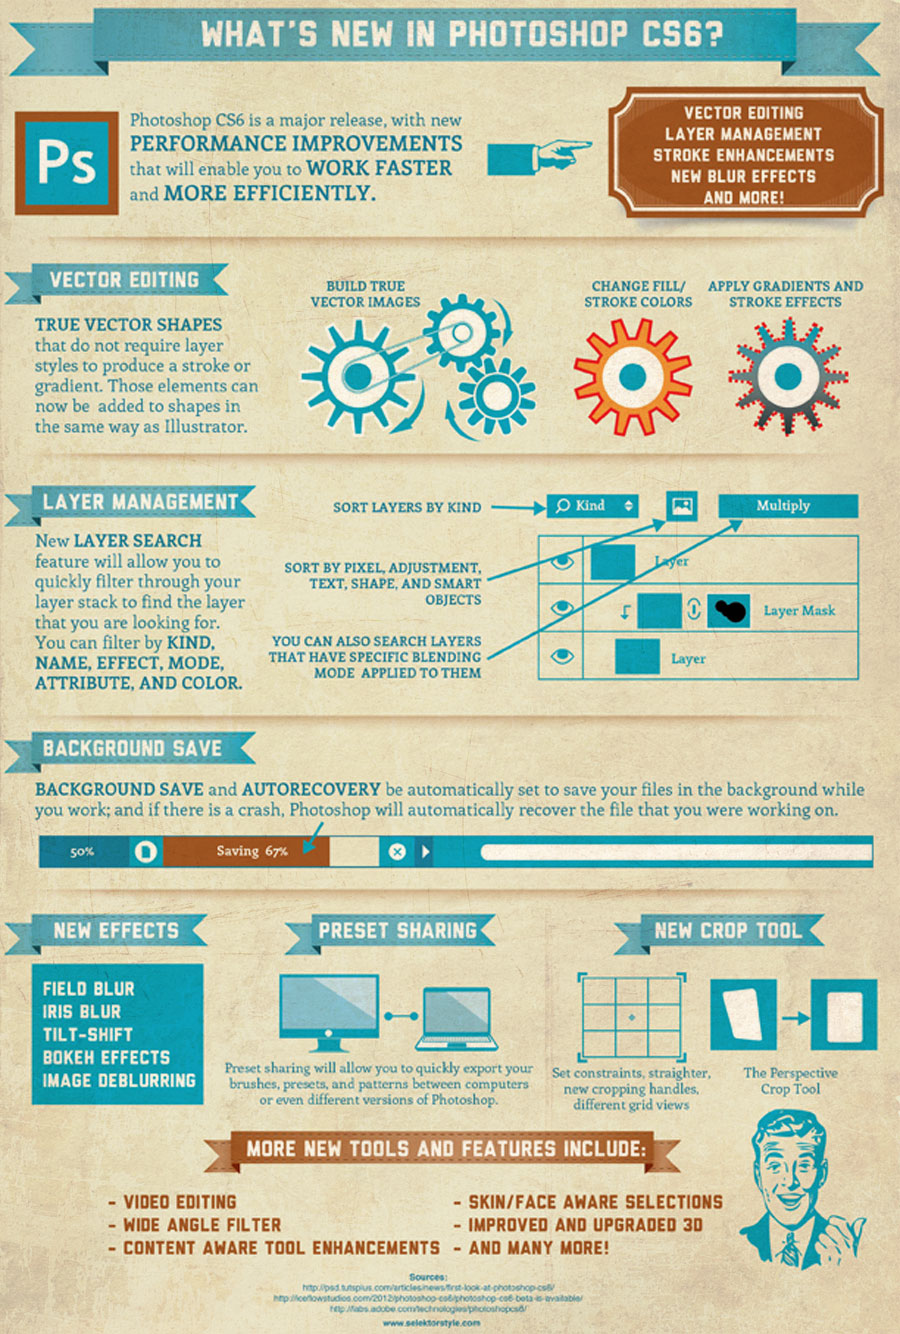 Education Infographics. PowerPoint | Educational infographic, Infographic templates, Infographic ...